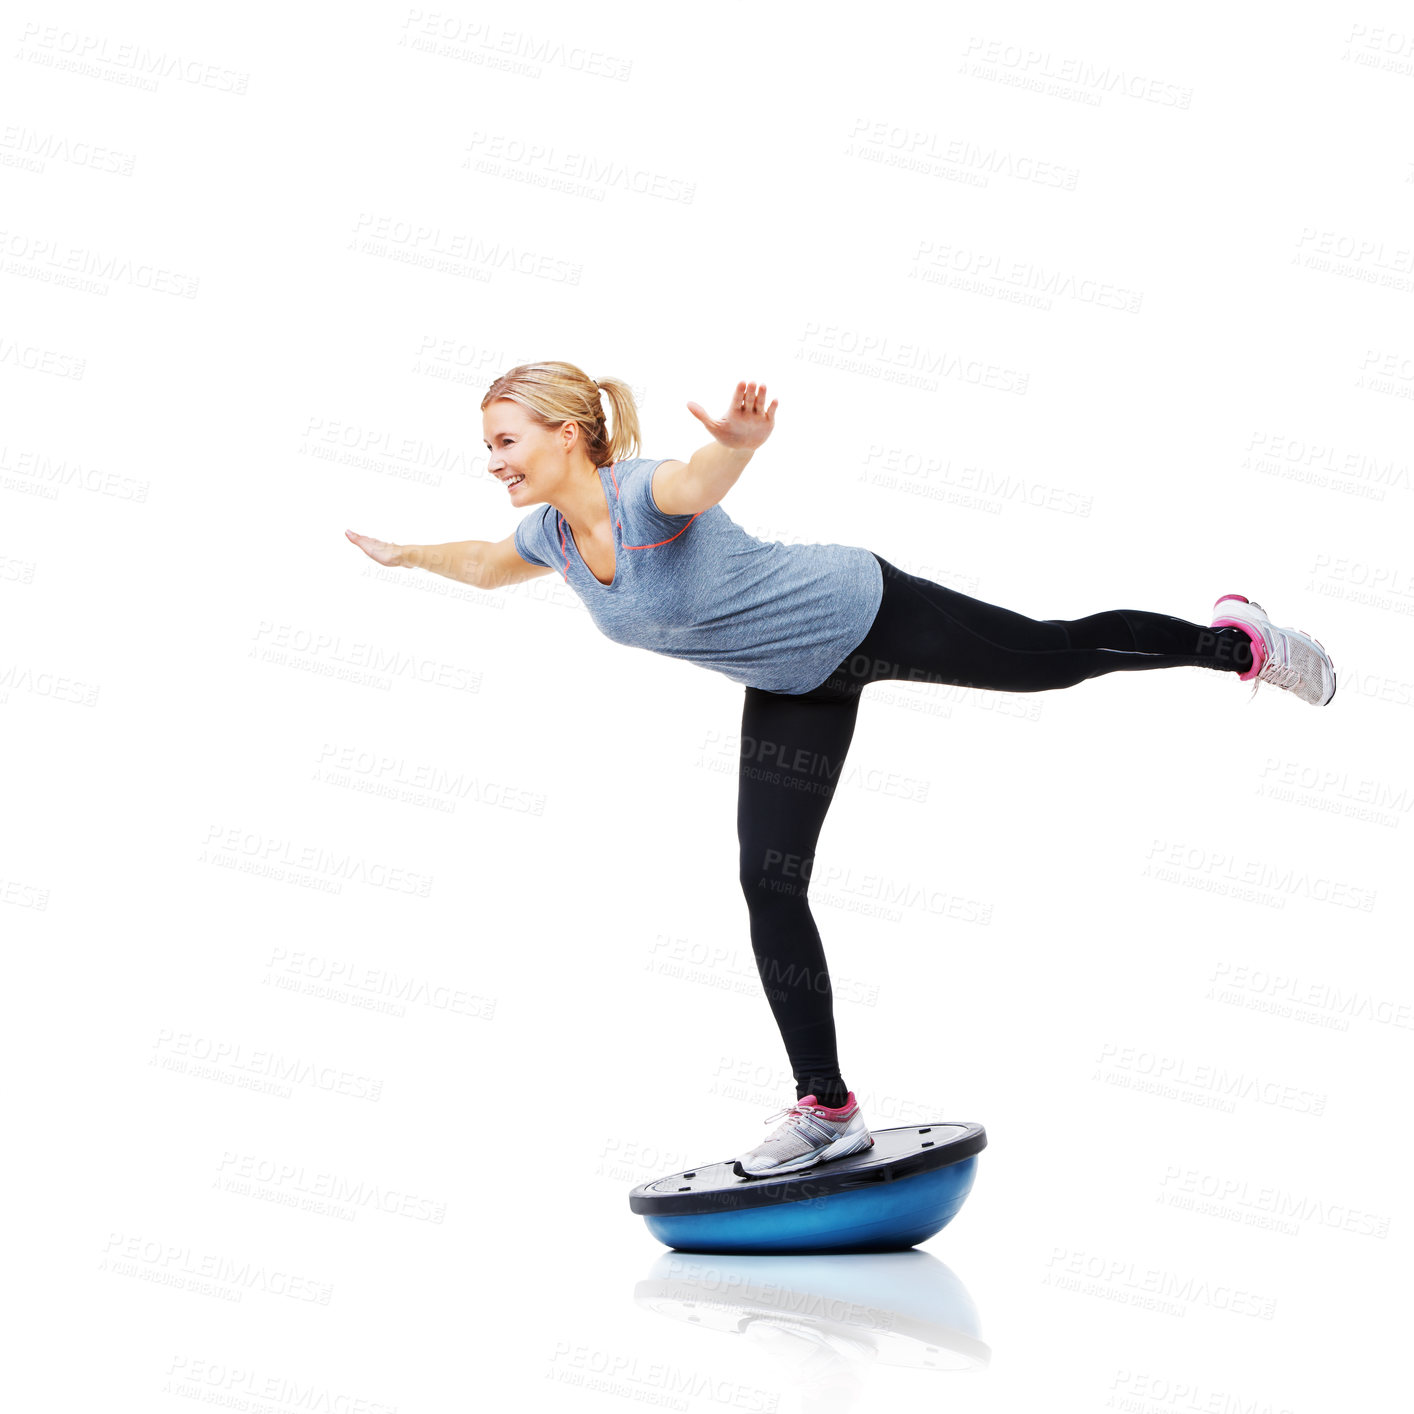 Buy stock photo An attractive young woman working her core muscles by balancing on a bosu-ball